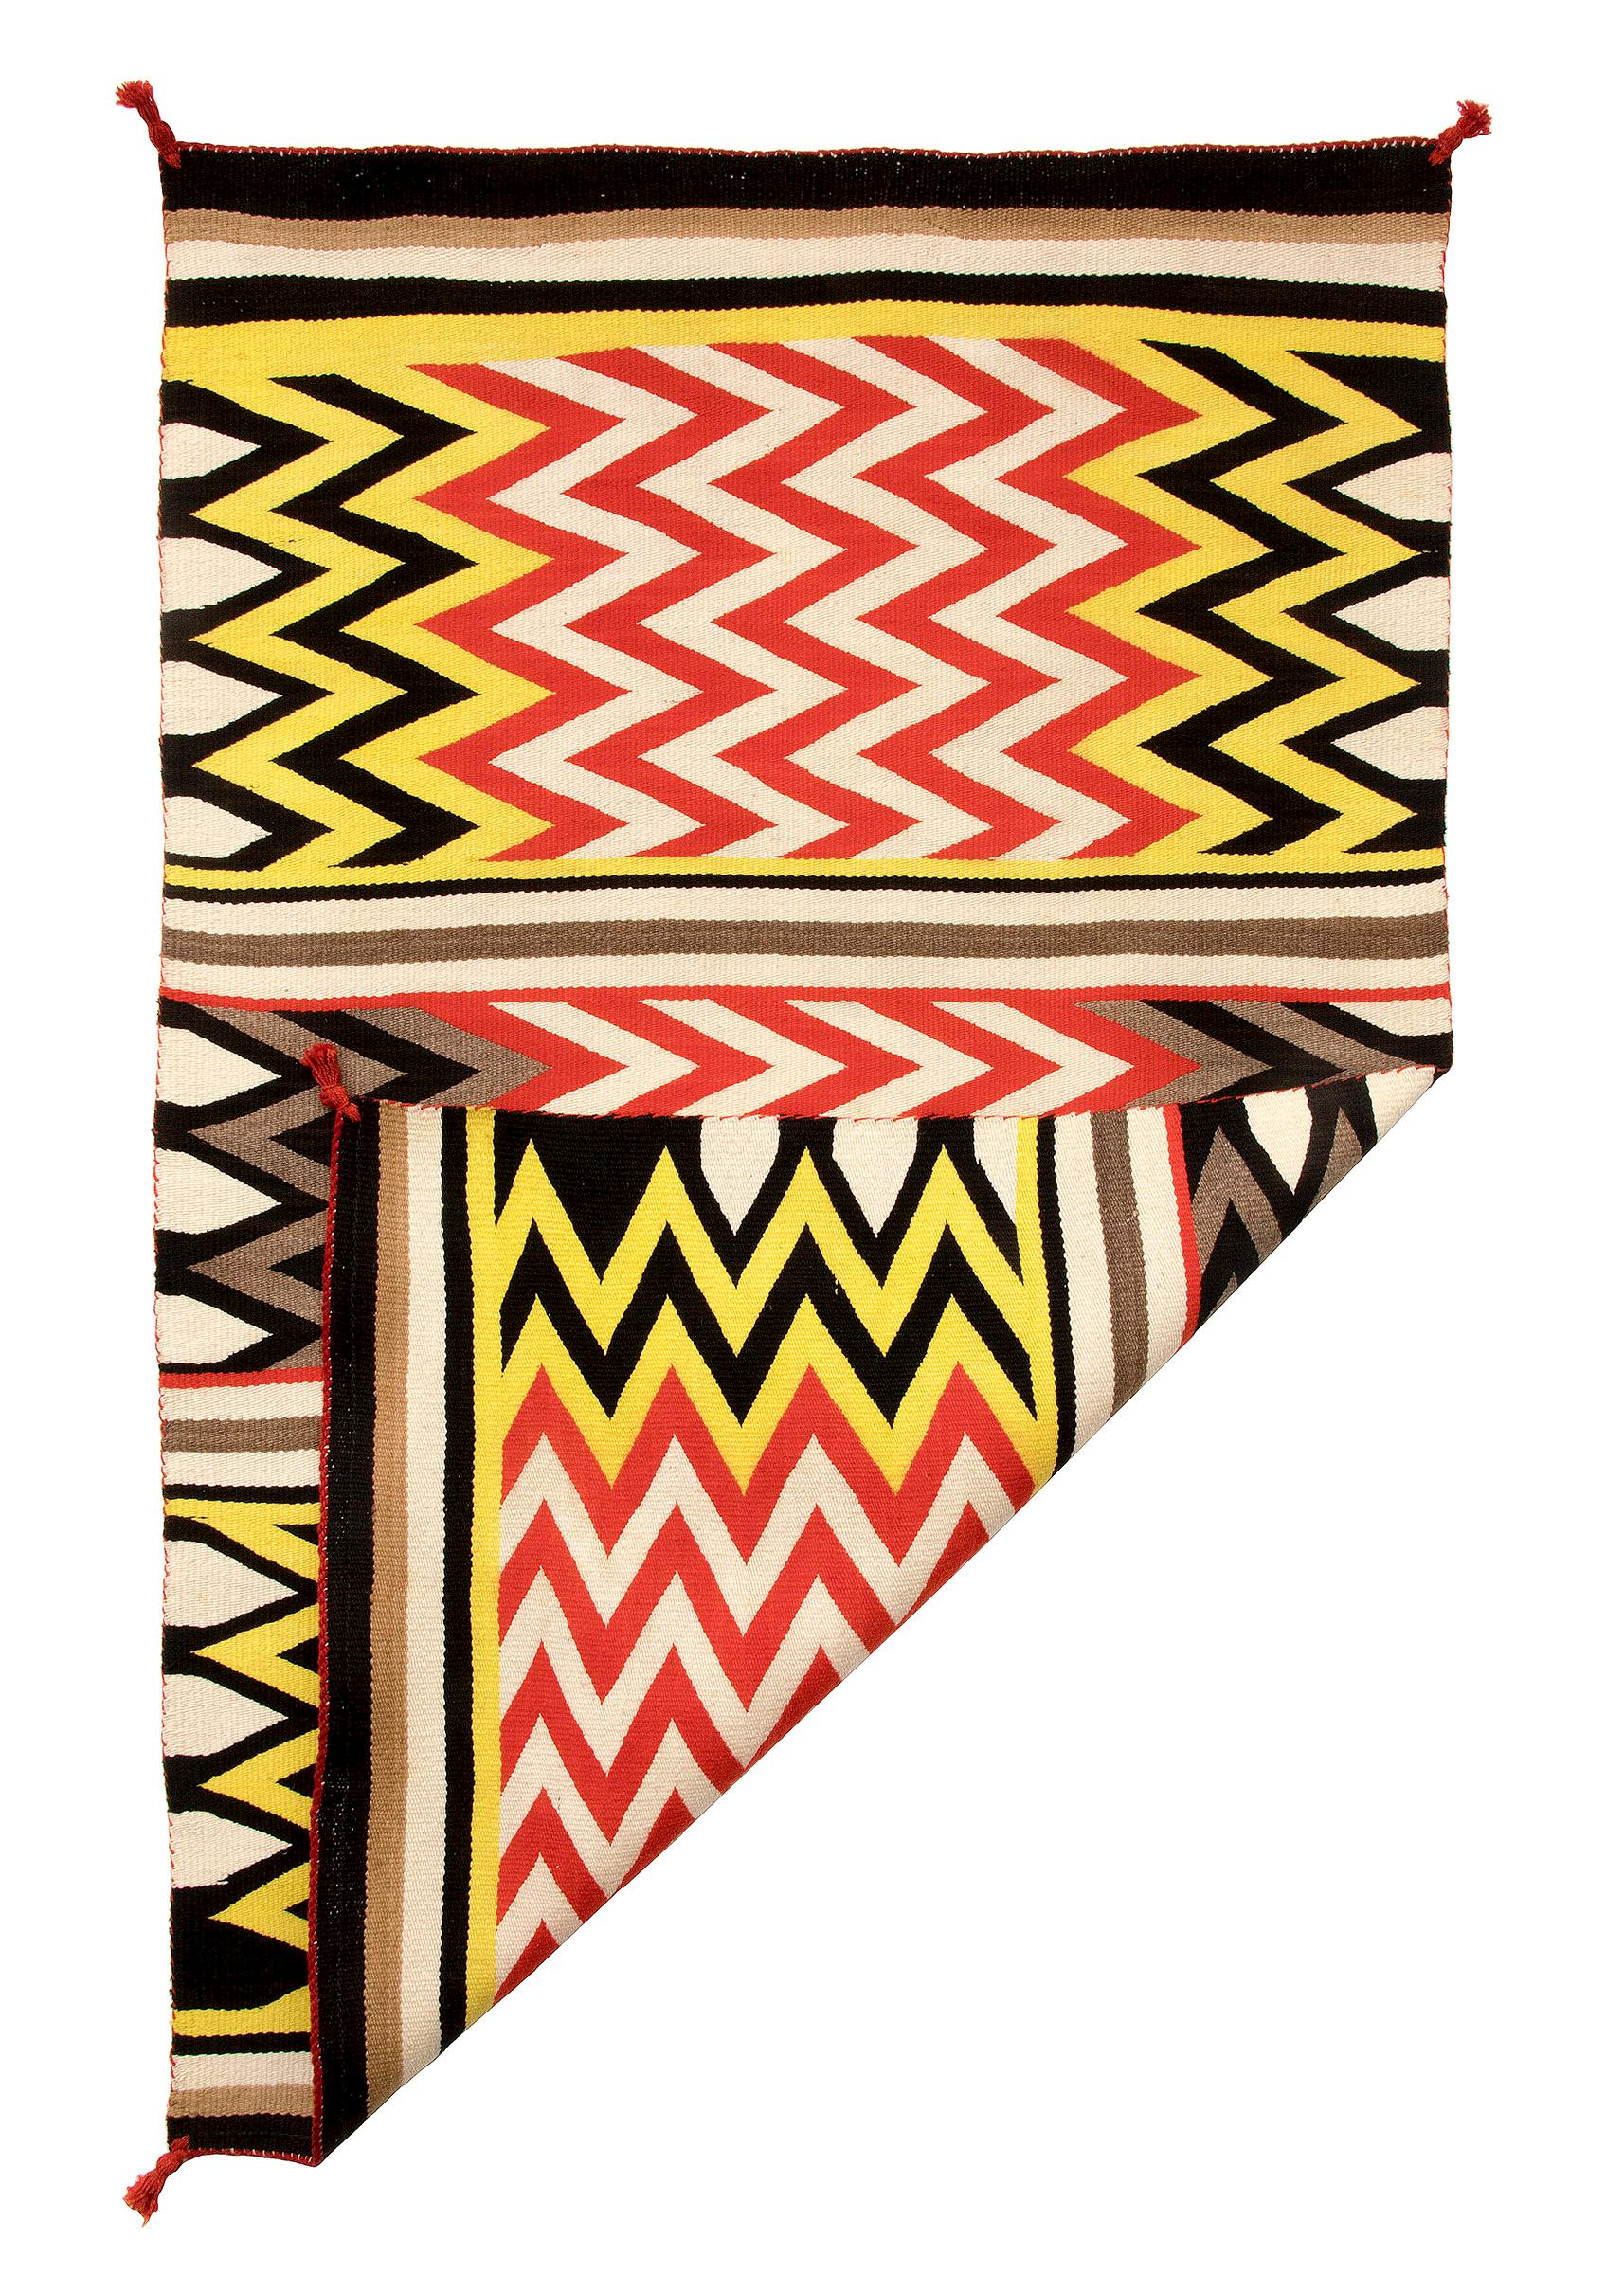 Vintage Navajo rug with a lightning pattern of zig-zag stripes. Southwestern weaving with a bold abstract pattern, woven of native hand-spun wool in natural fleece colors of white/ivory, brown and black with aniline dyed red and yellow. Dimensions